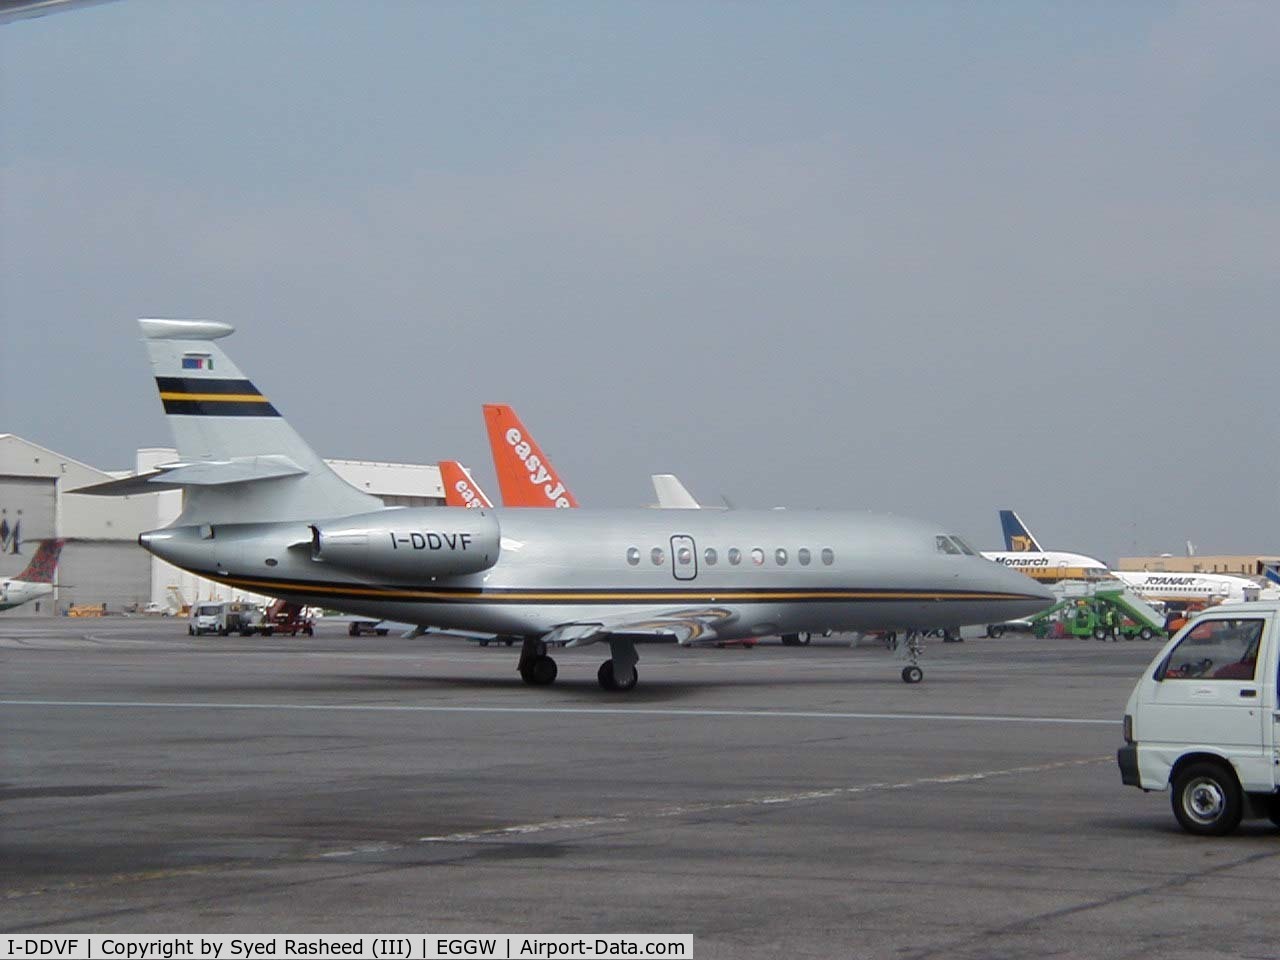 I-DDVF, 2001 Dassault Falcon 2000 C/N 161, Falcon 2000 taxing out from Signature (EGGW)